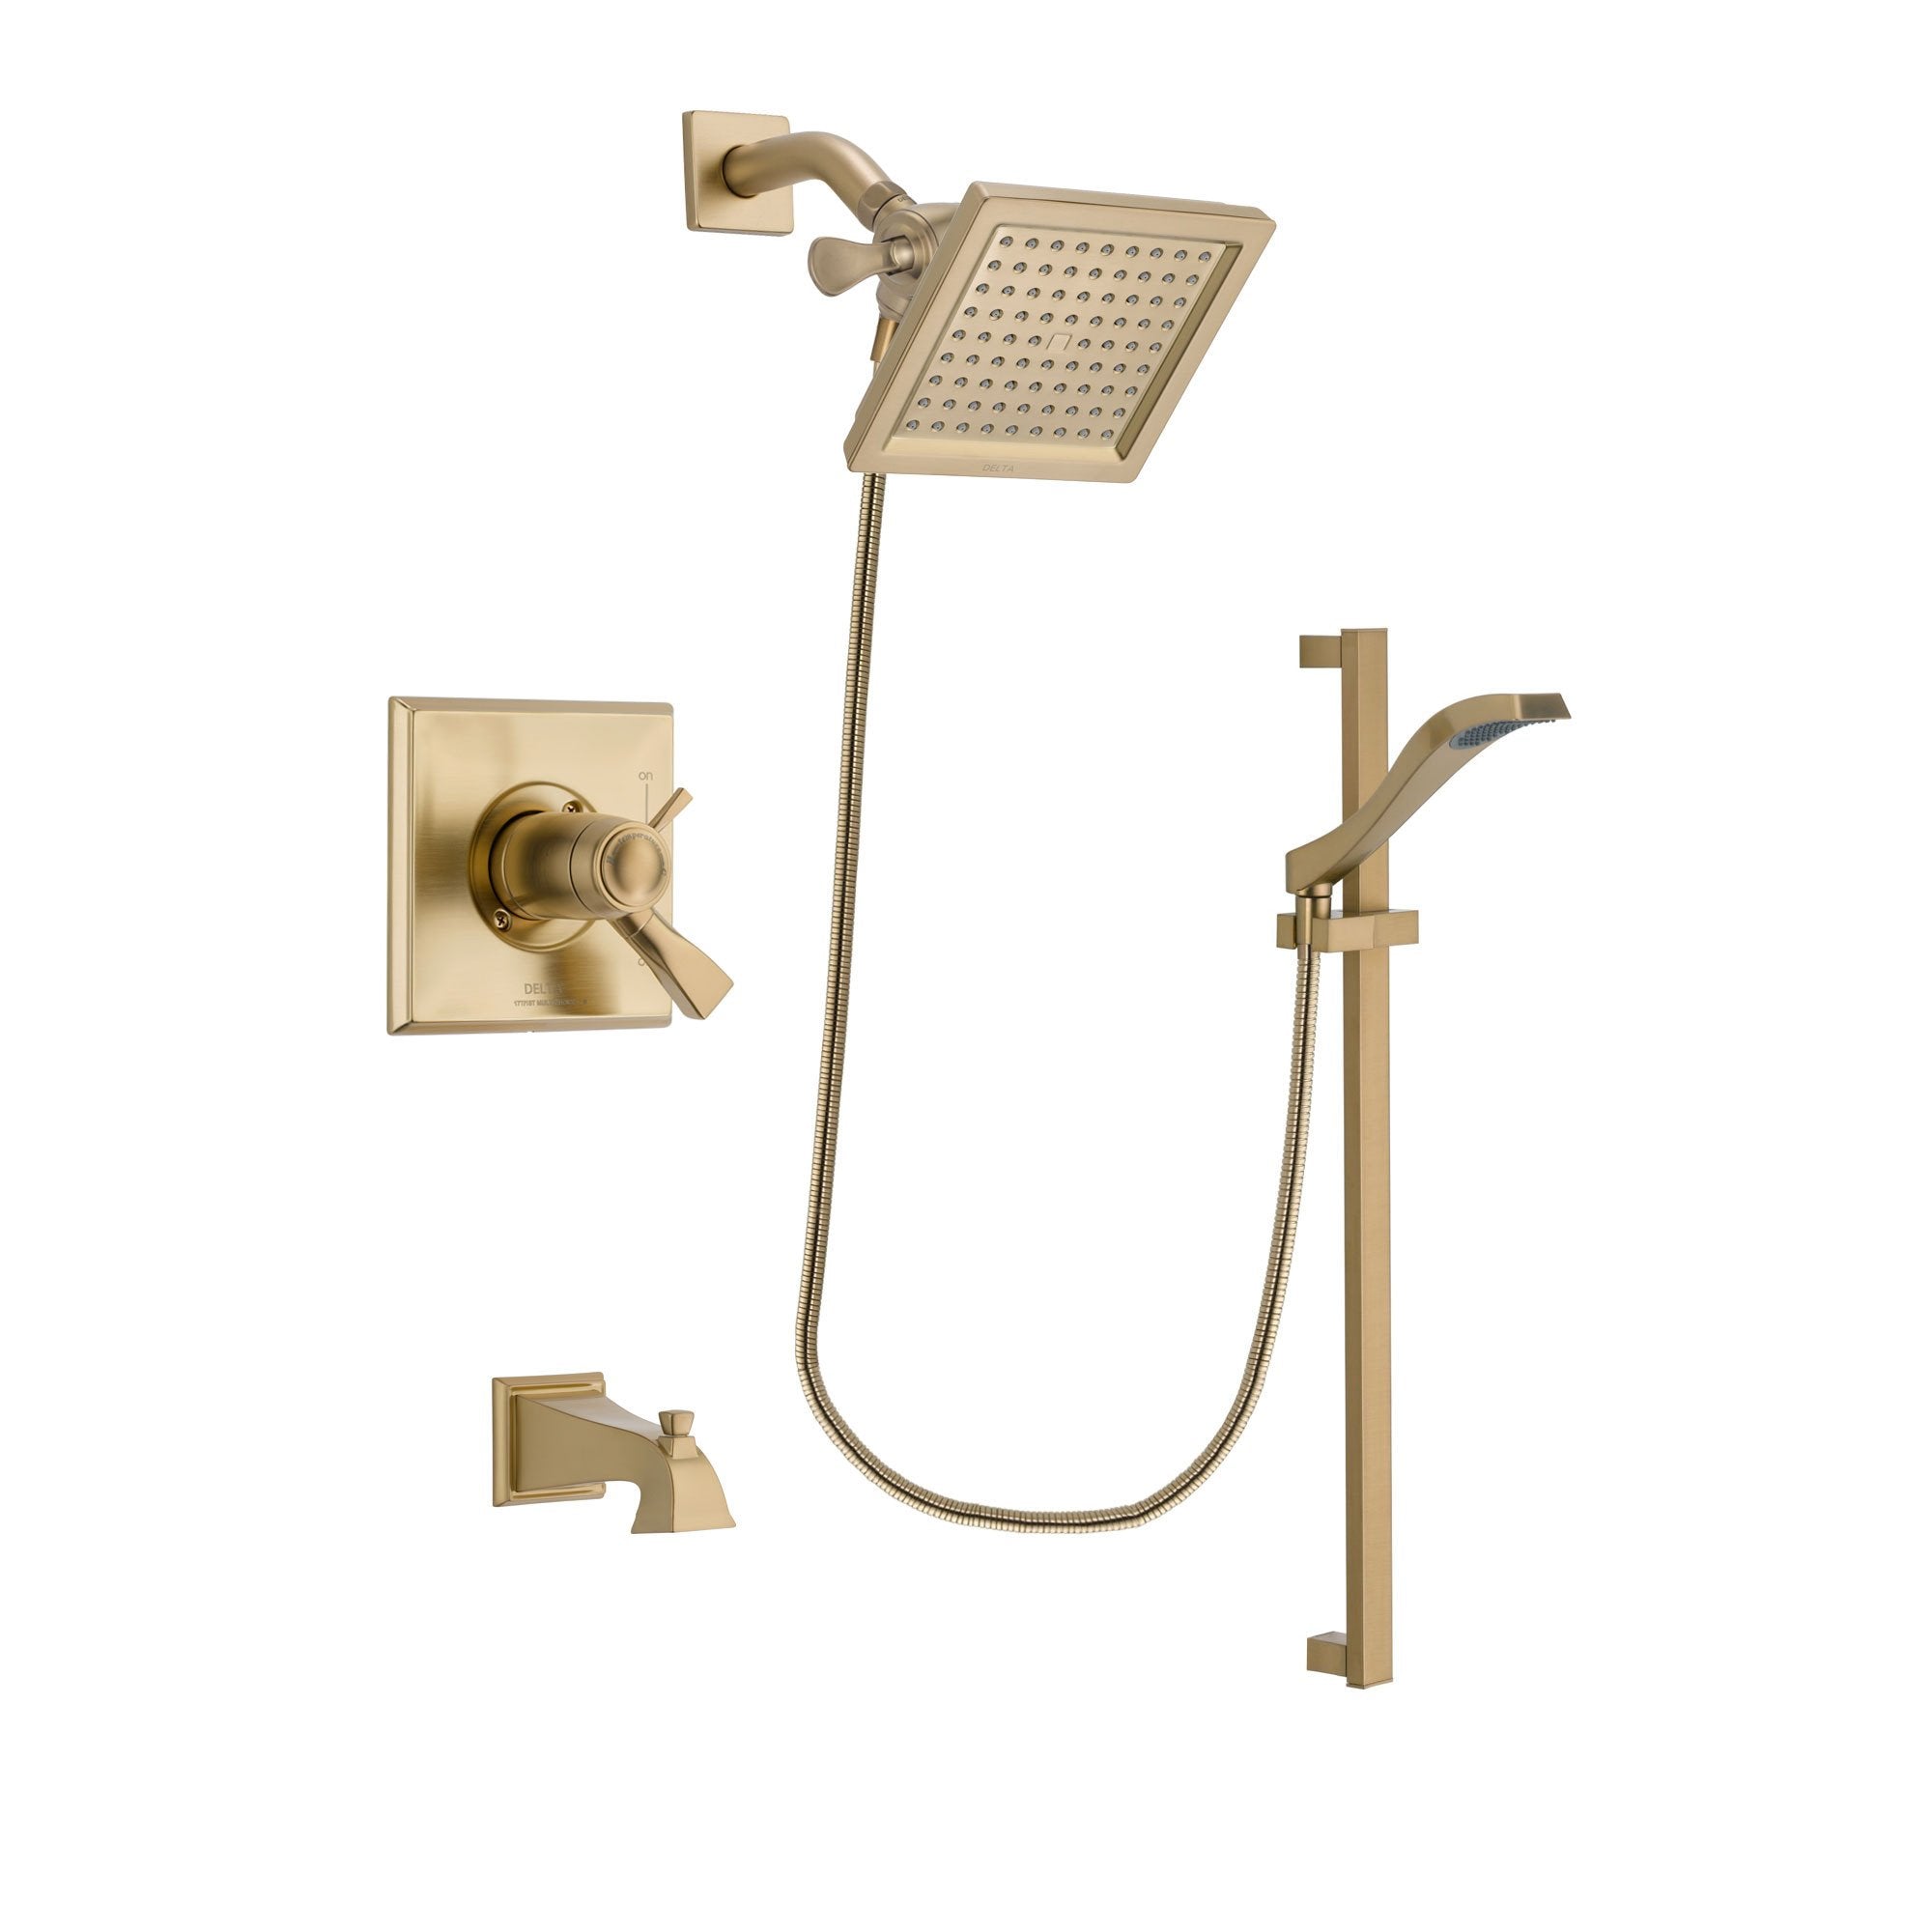 Delta Dryden Champagne Bronze Finish Thermostatic Tub and Shower Faucet System Package with 6.5-inch Square Rain Showerhead and Modern Handheld Shower Spray with Slide Bar Includes Rough-in Valve and Tub Spout DSP3921V